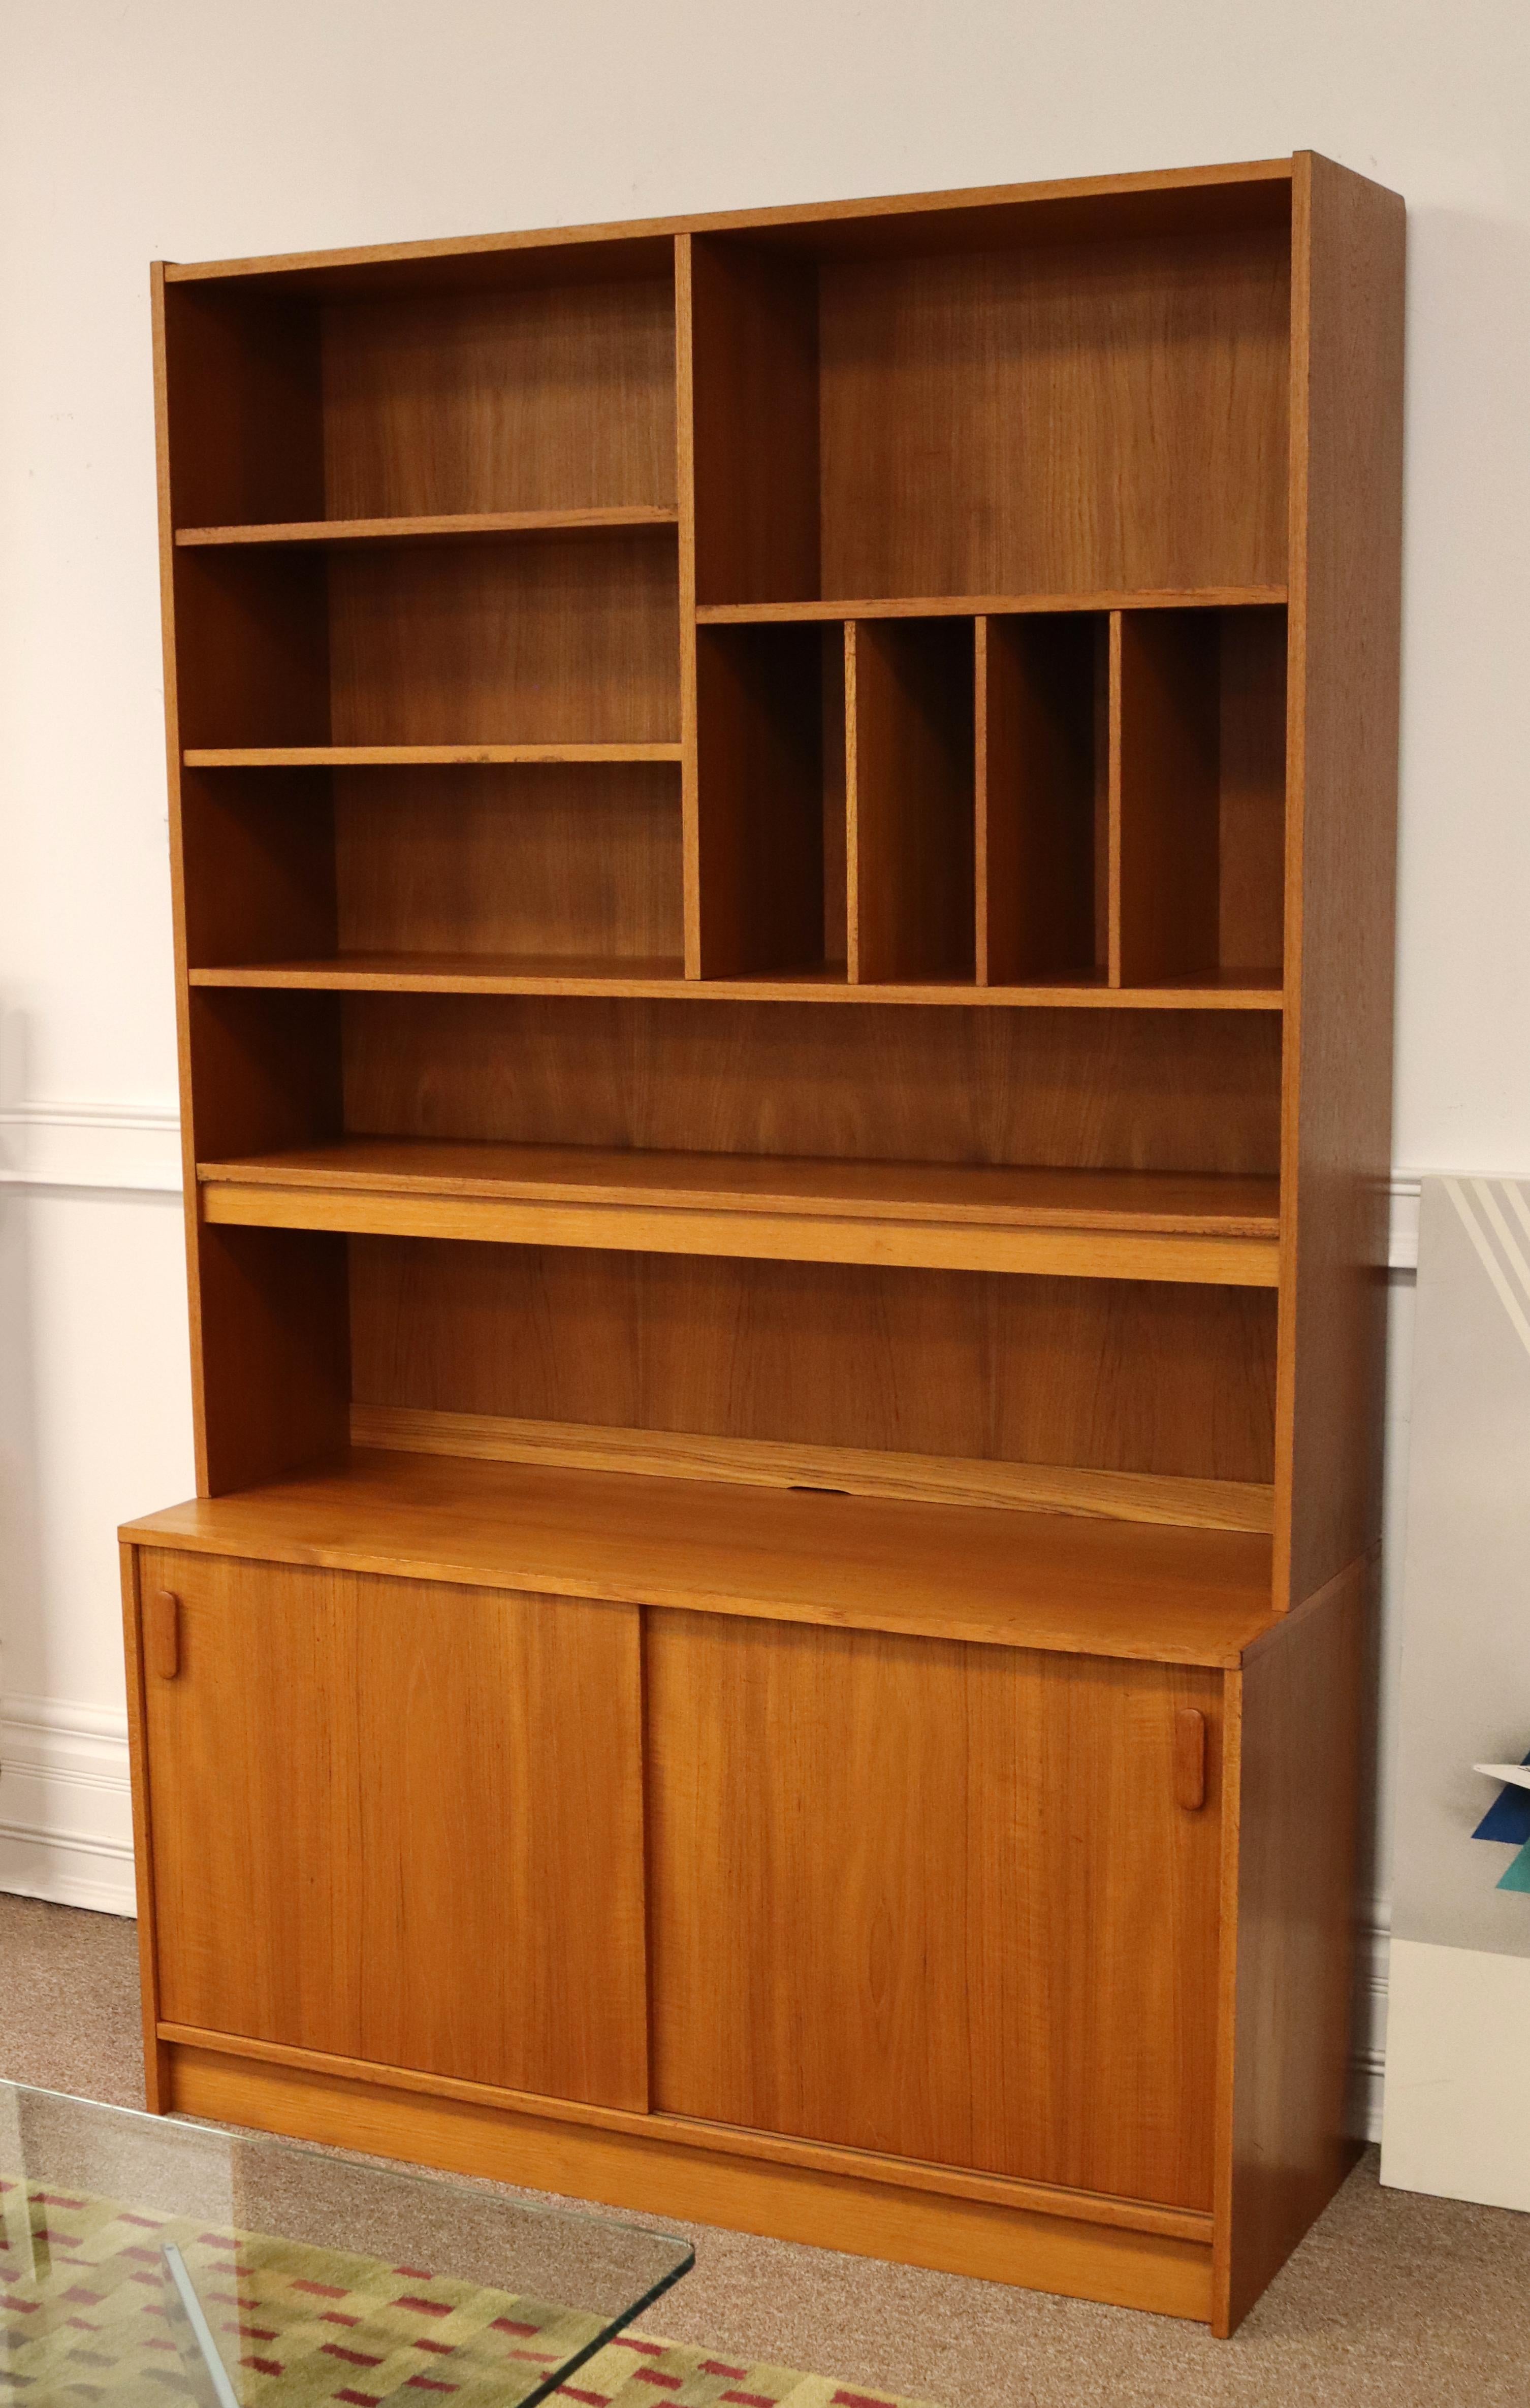 For your consideration is a fantastic, Scandinavian wall unit, made of teak, made in Denmark, circa the 1960s.In excellent condition. The dimensions are 47.5